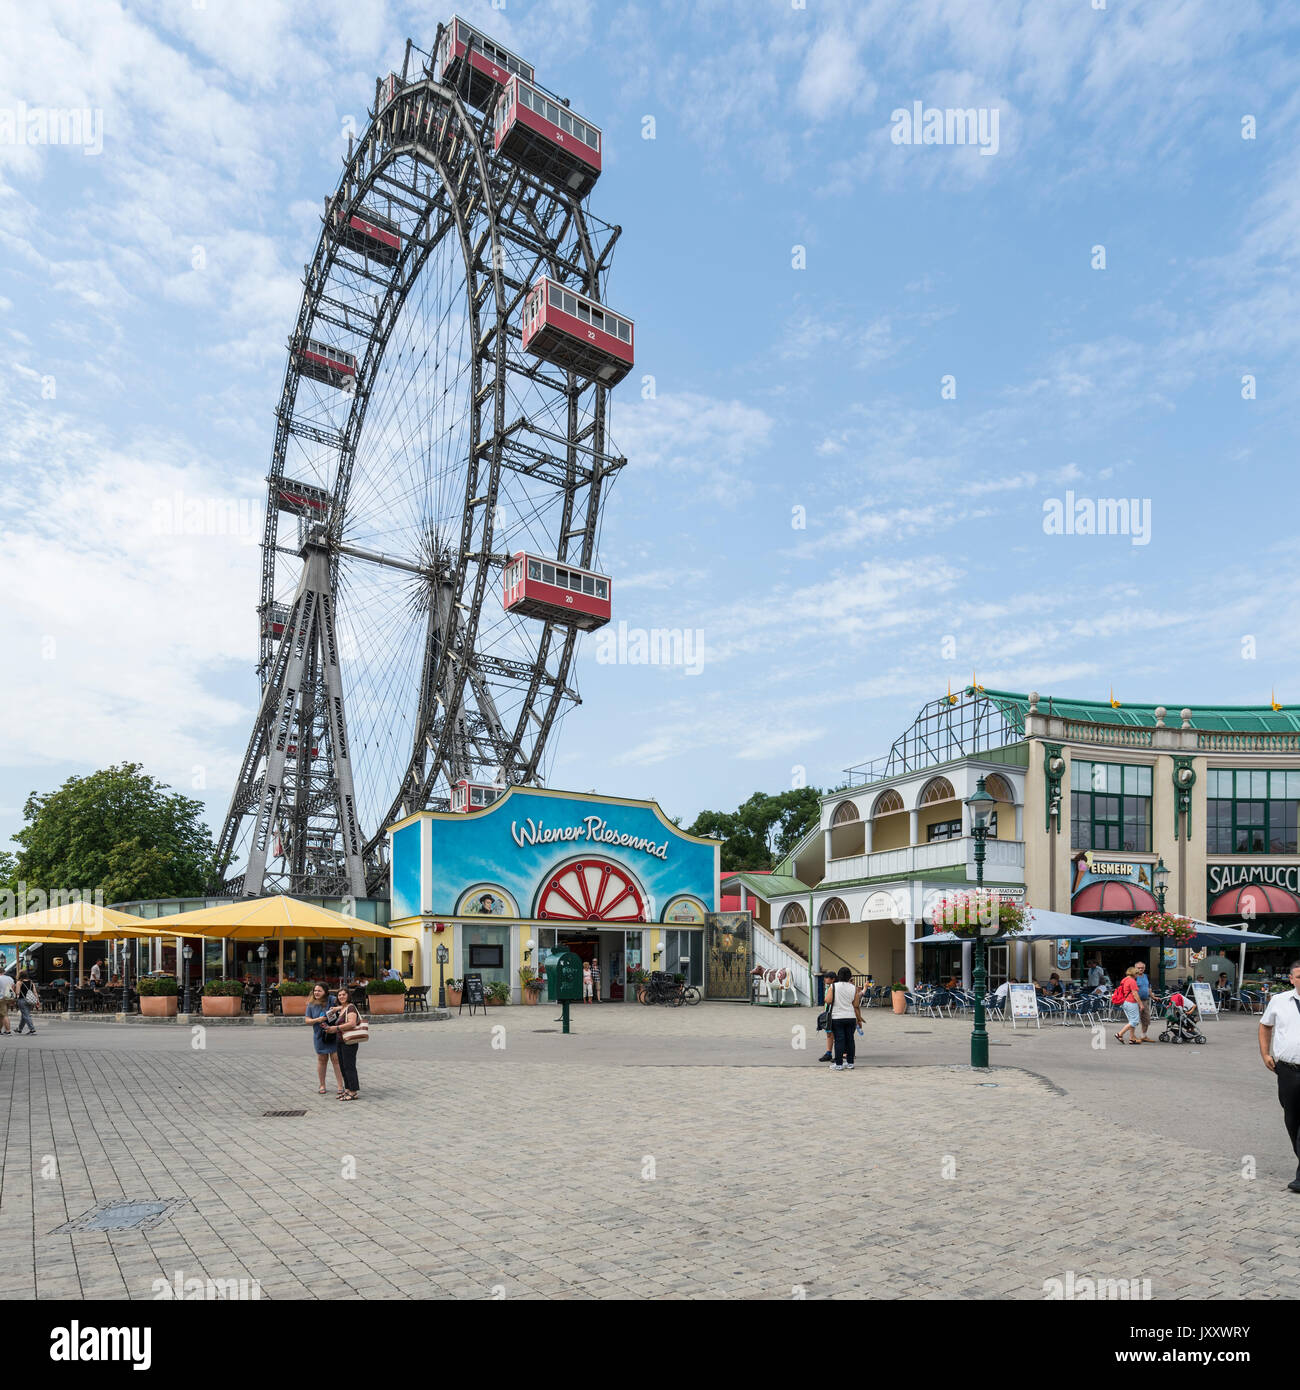 The famous Ferris wheel in the Prater park in Vienna Stock Photo